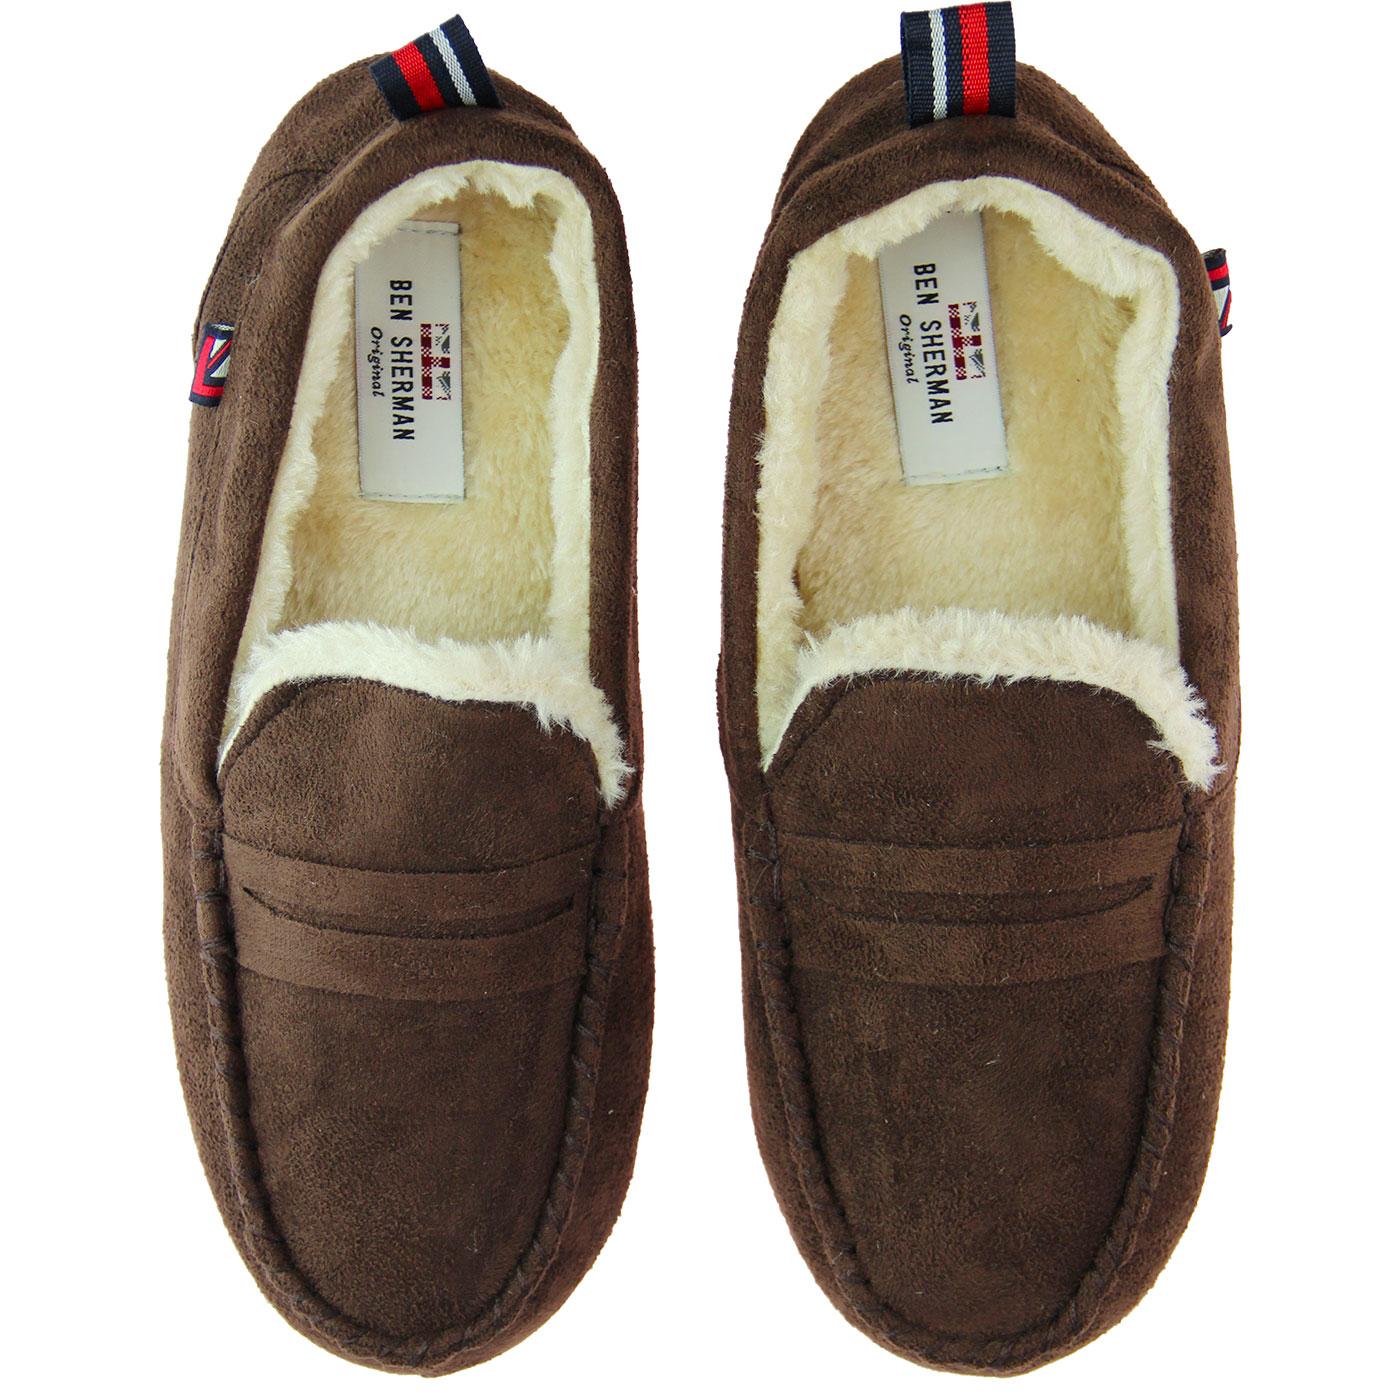 Four Seasons Mod Moccasin Slippers Brown